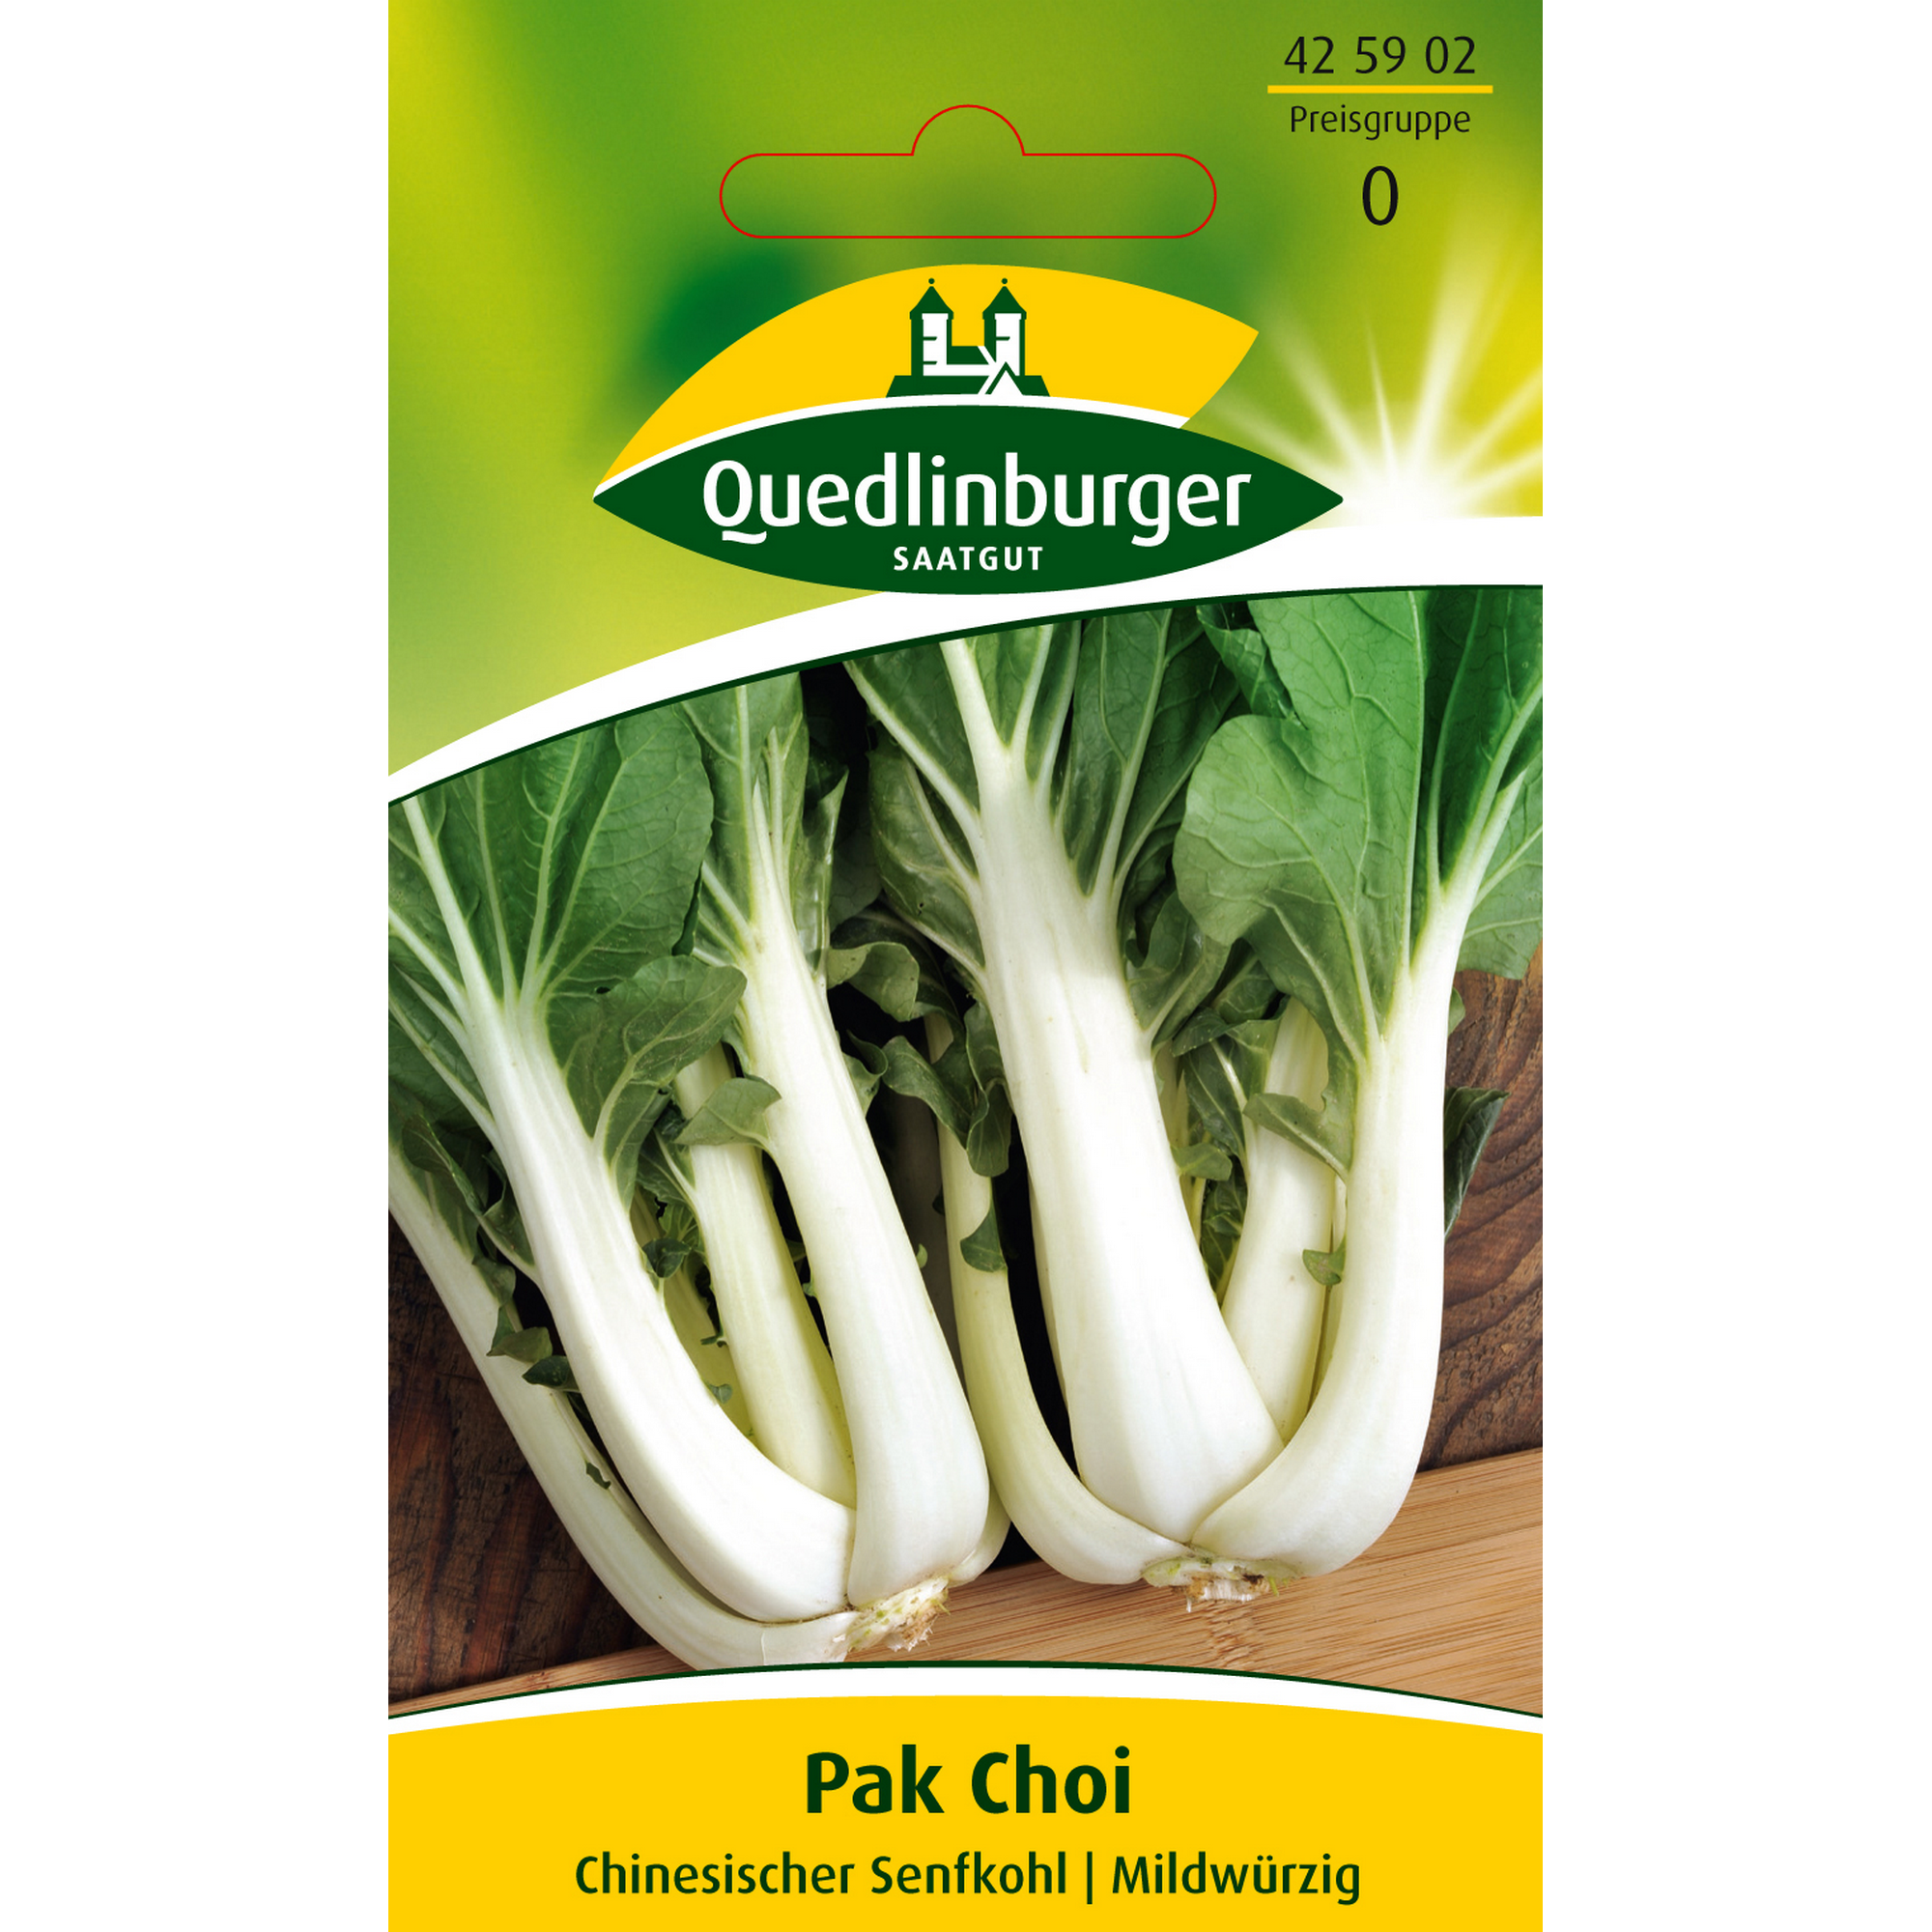 Chinesischer Senfkohl 'Pak Choi' + product picture